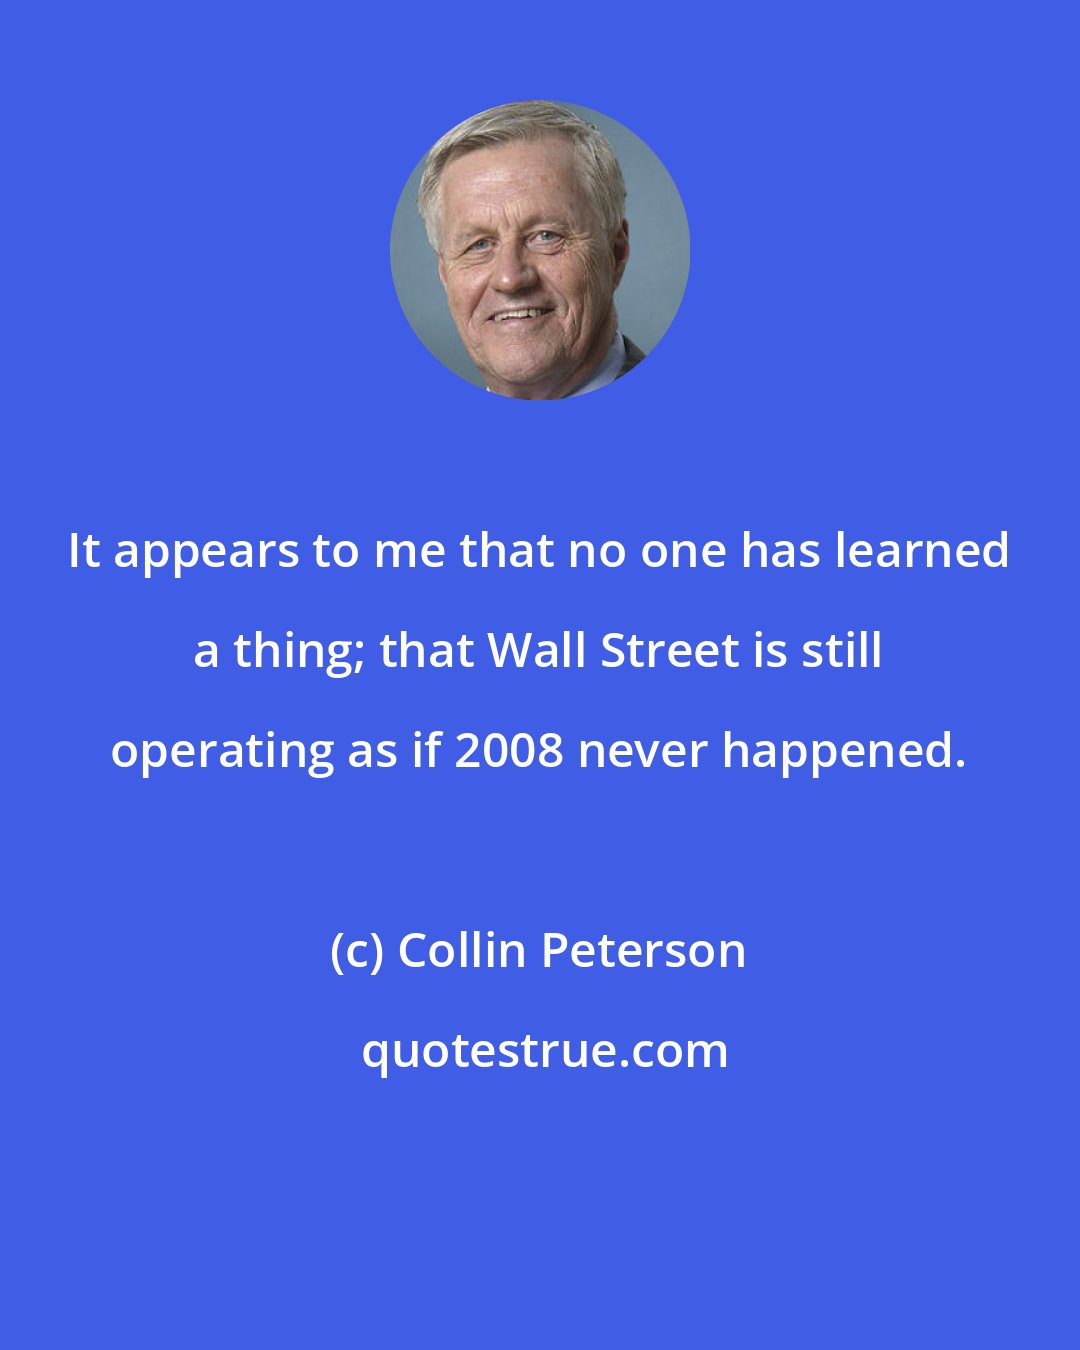 Collin Peterson: It appears to me that no one has learned a thing; that Wall Street is still operating as if 2008 never happened.